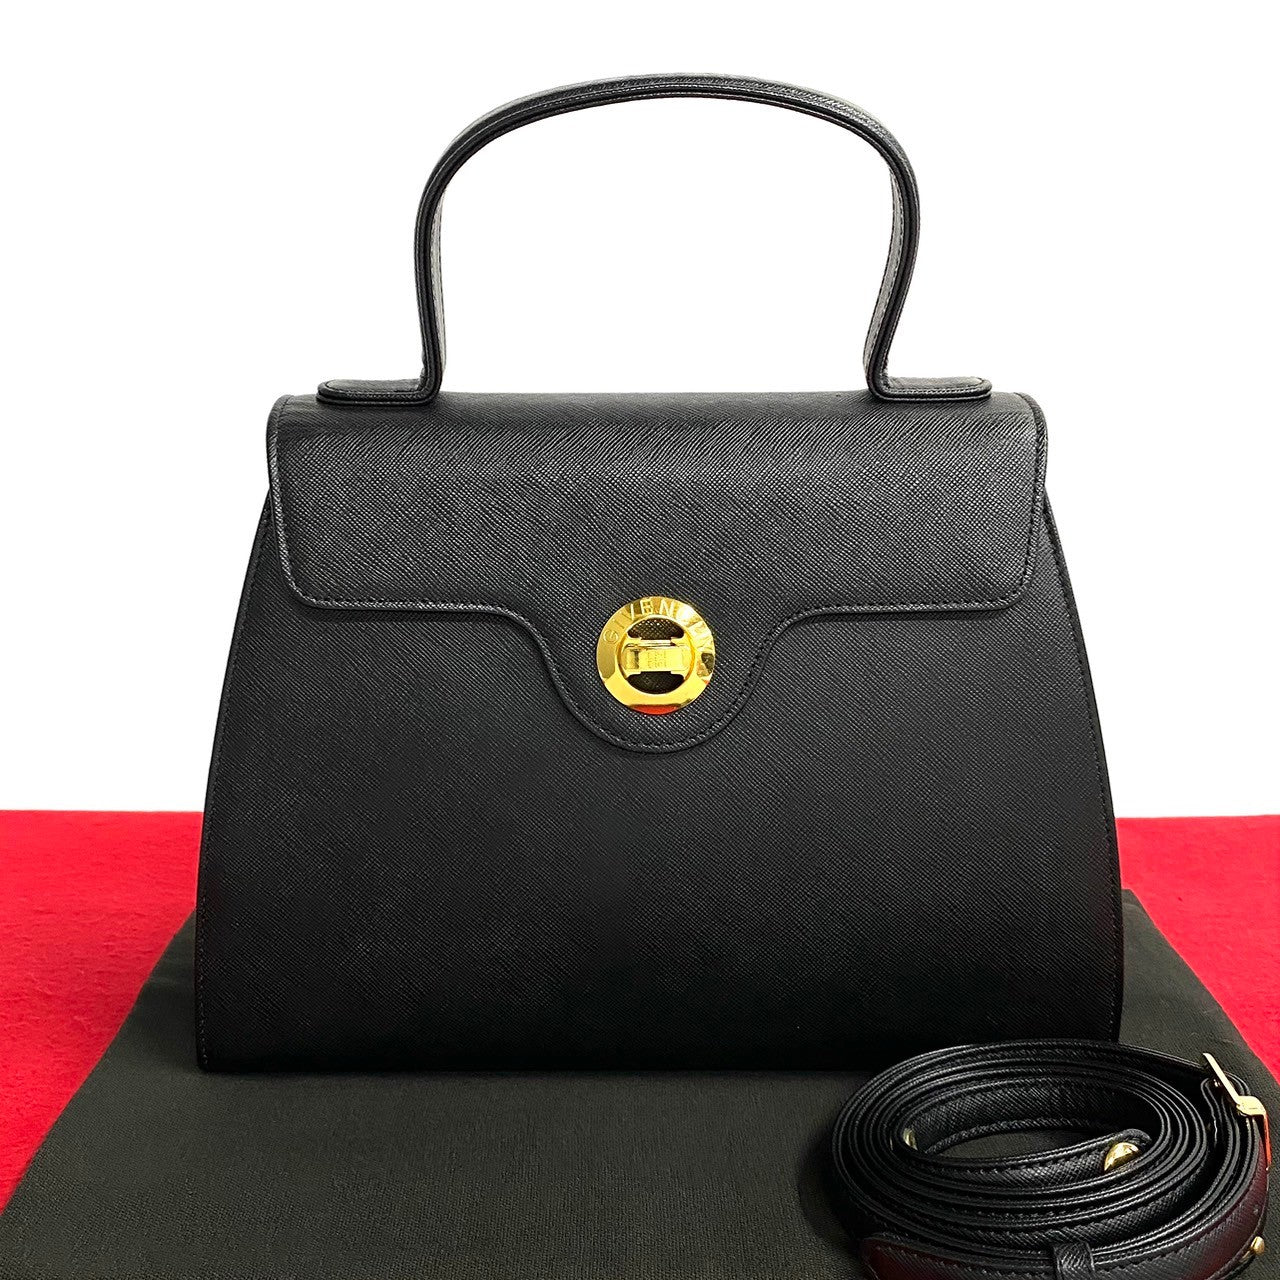 Givenchy Leather Handbag Leather Handbag in Excellent condition